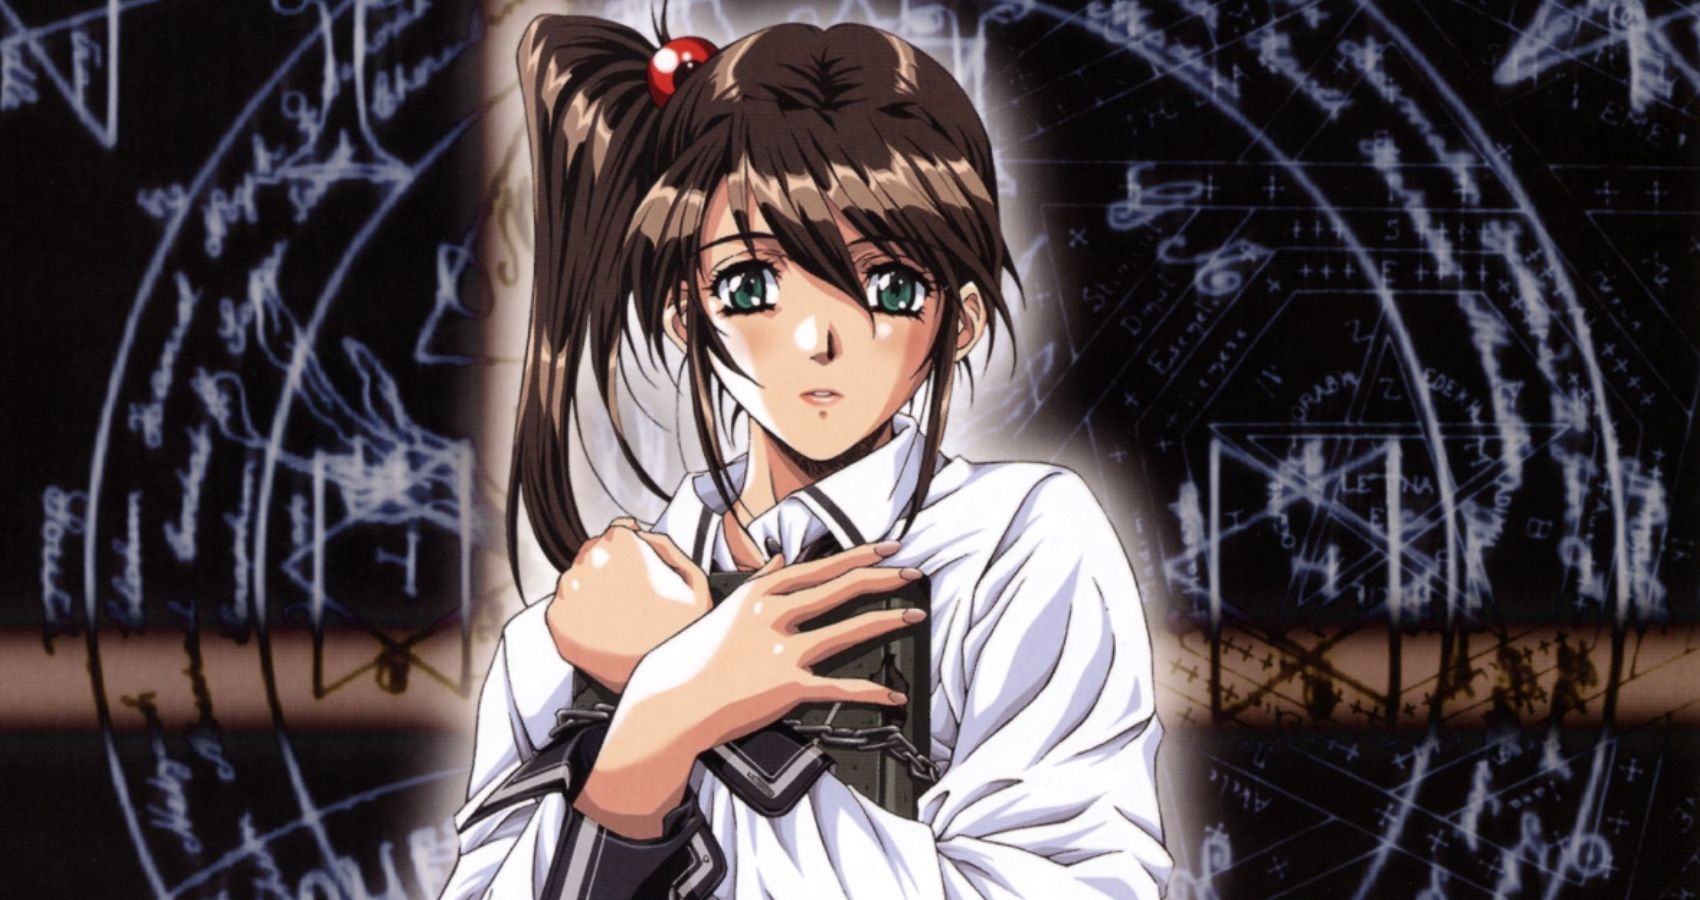 Bible Black Hentai Game - 20 Years Later, Bible Black Is Still A Wicked Horror Romp